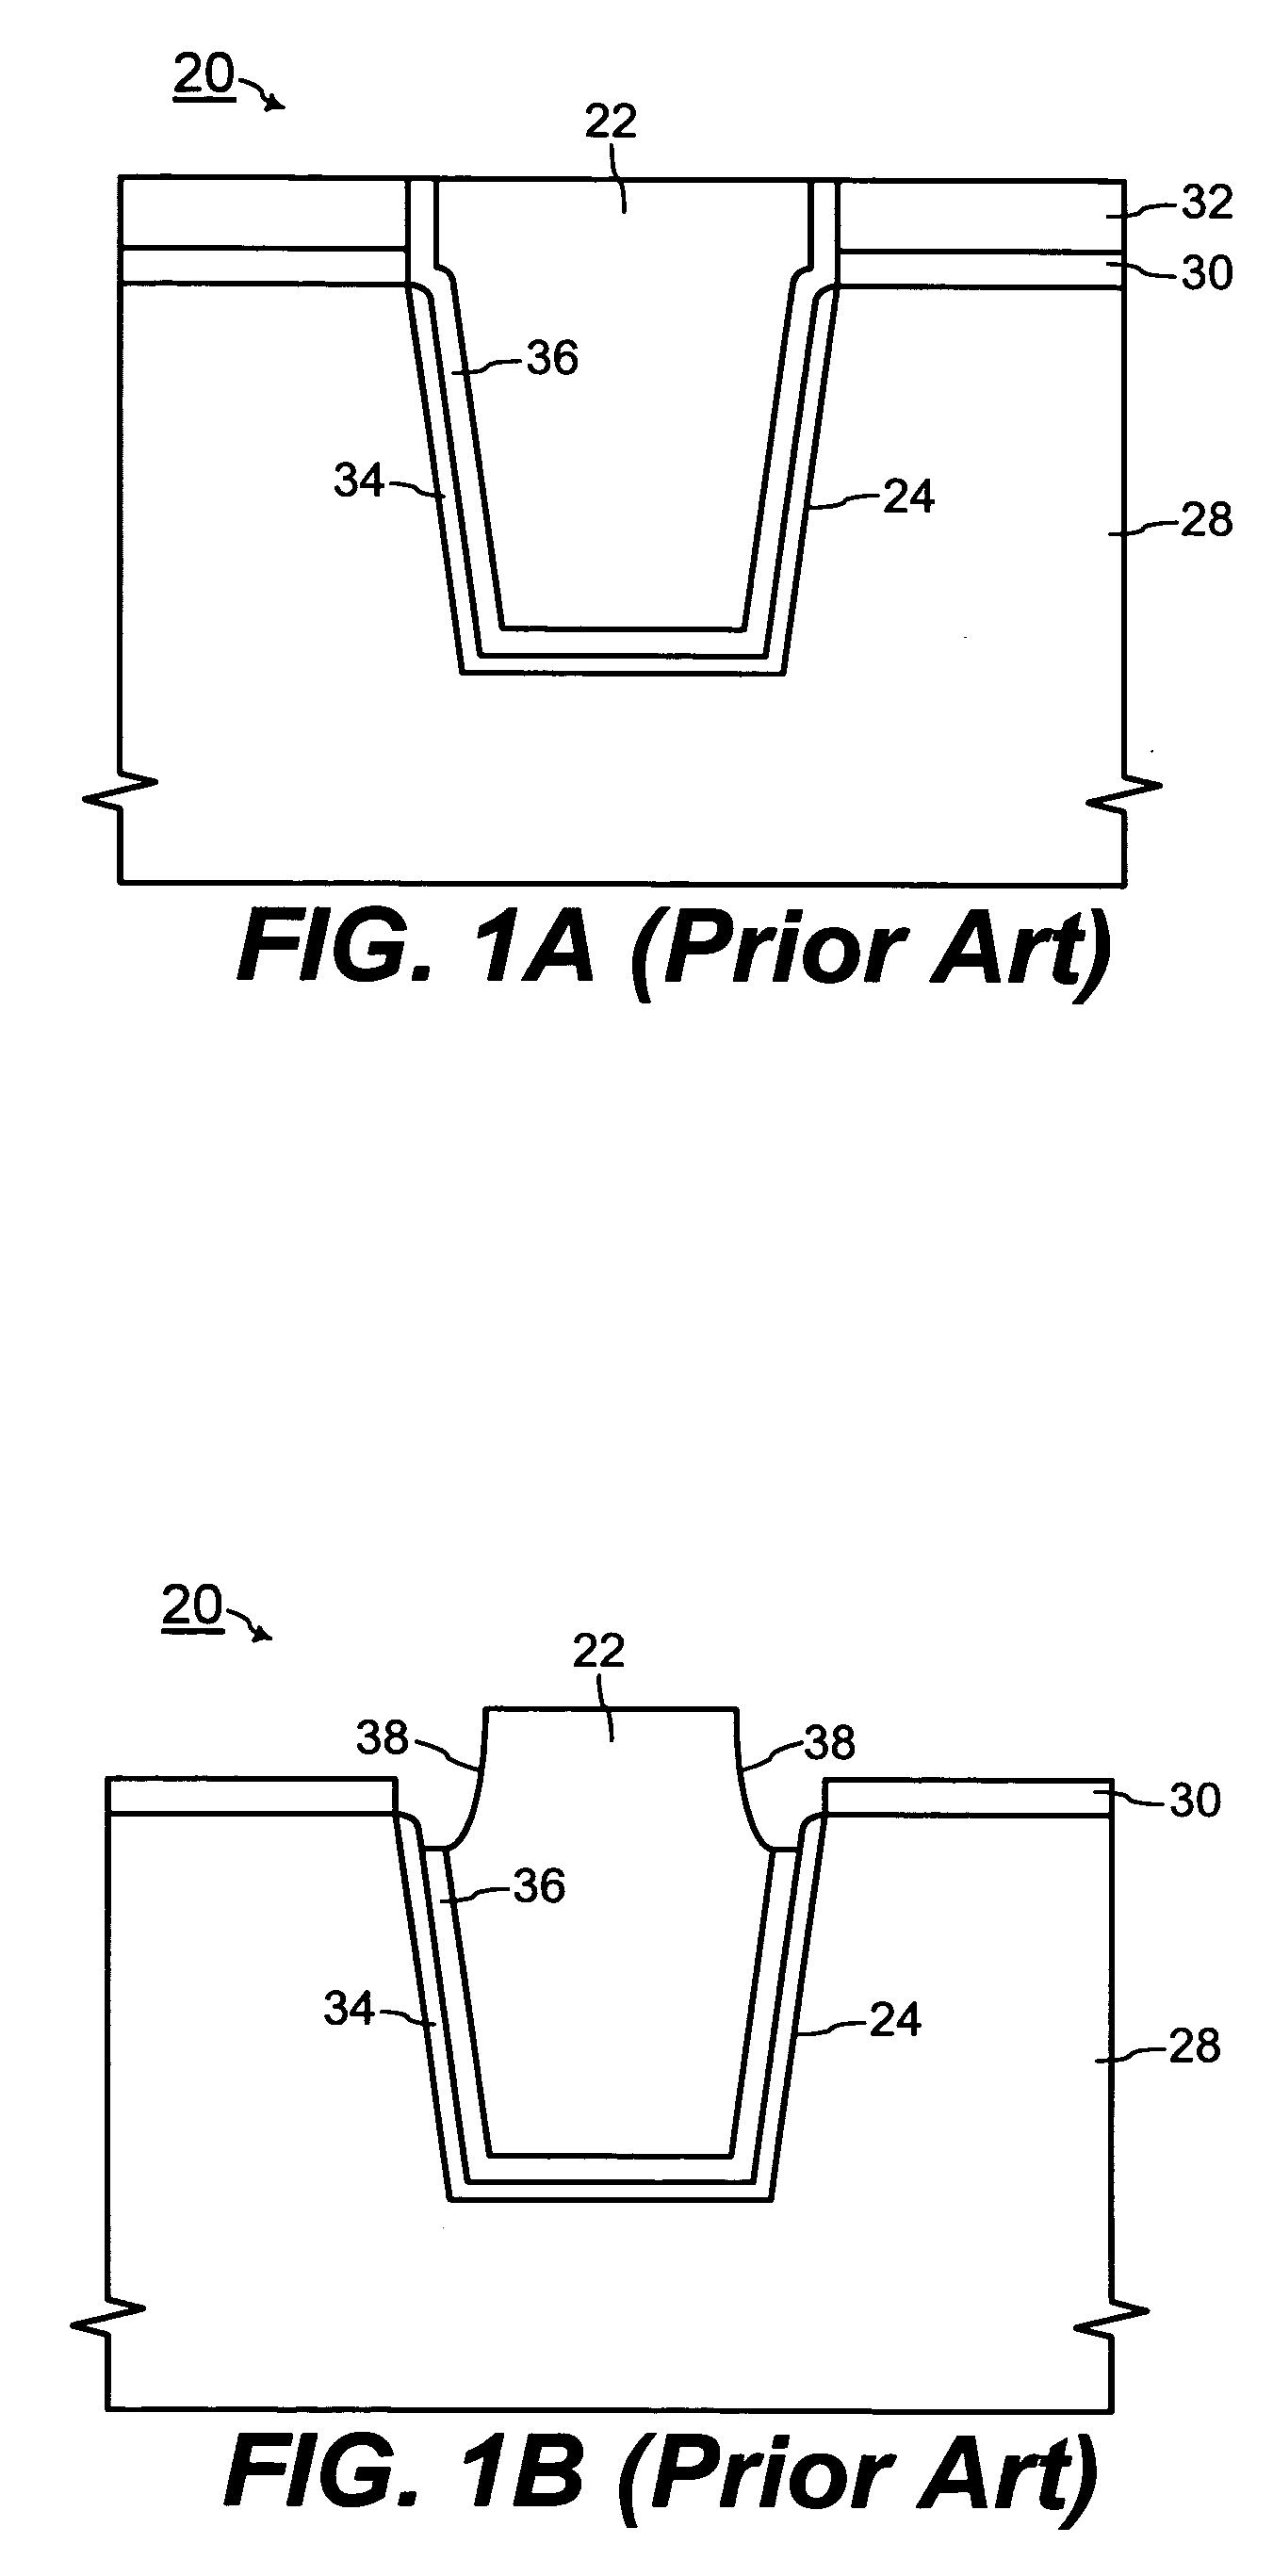 Shallow trench isolation structure with converted liner layer